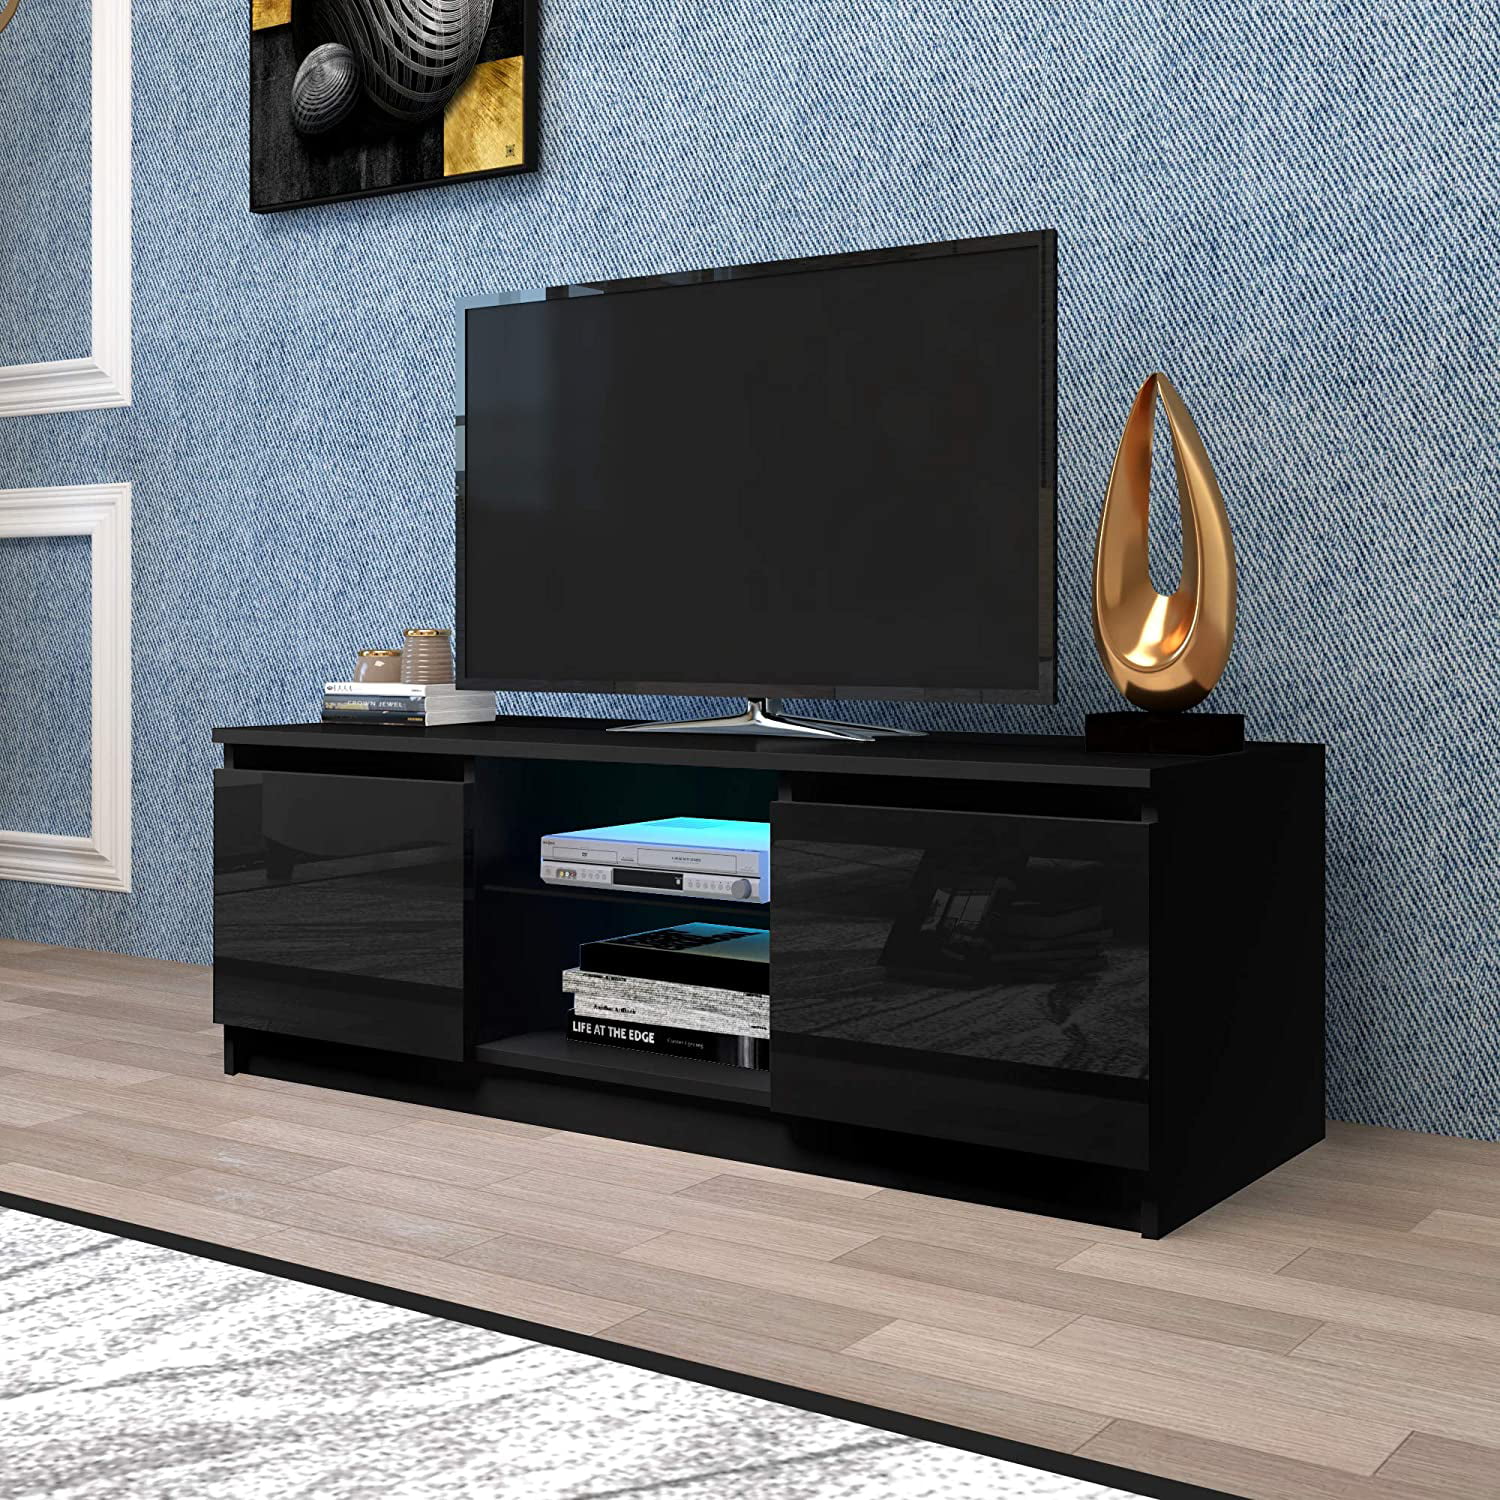 Details about   TV Stand Entertainment Center Media Console Furniture Wood Storage Cabinet Black 